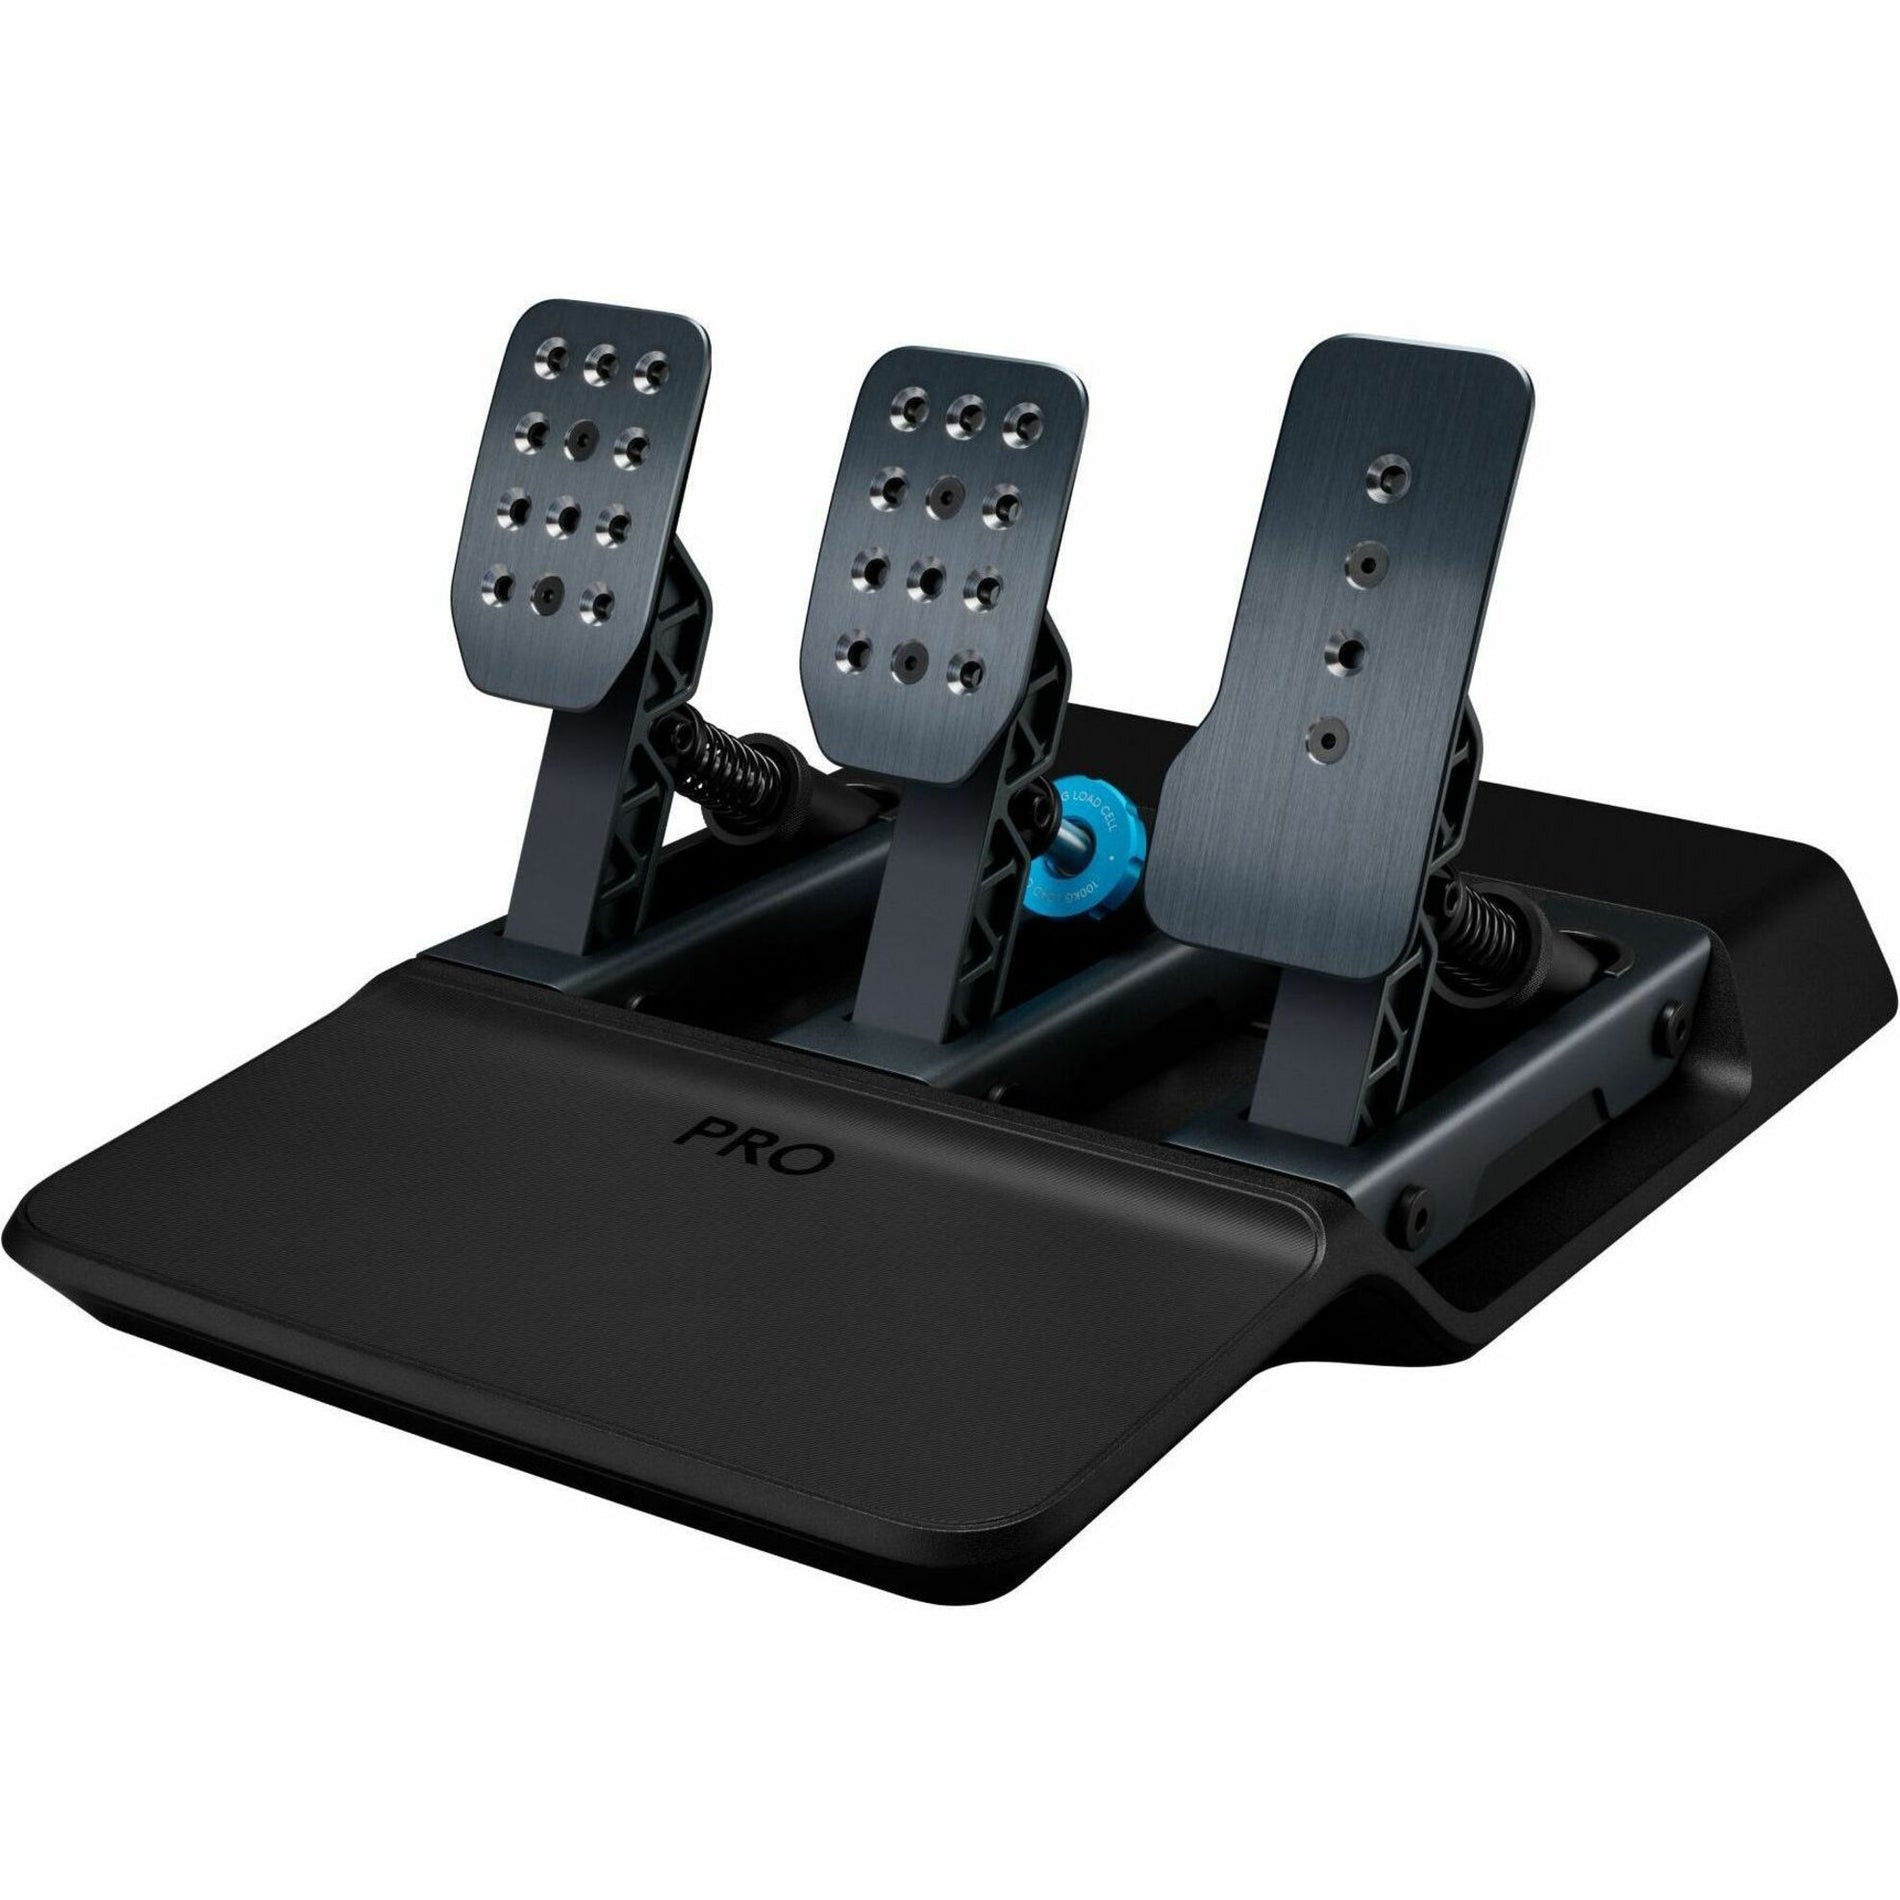 Logitech G 941-000186 Pro Racing Pedal, USB Gaming Pedal with Brake Pedal Elastomers, Pedal Springs, and More